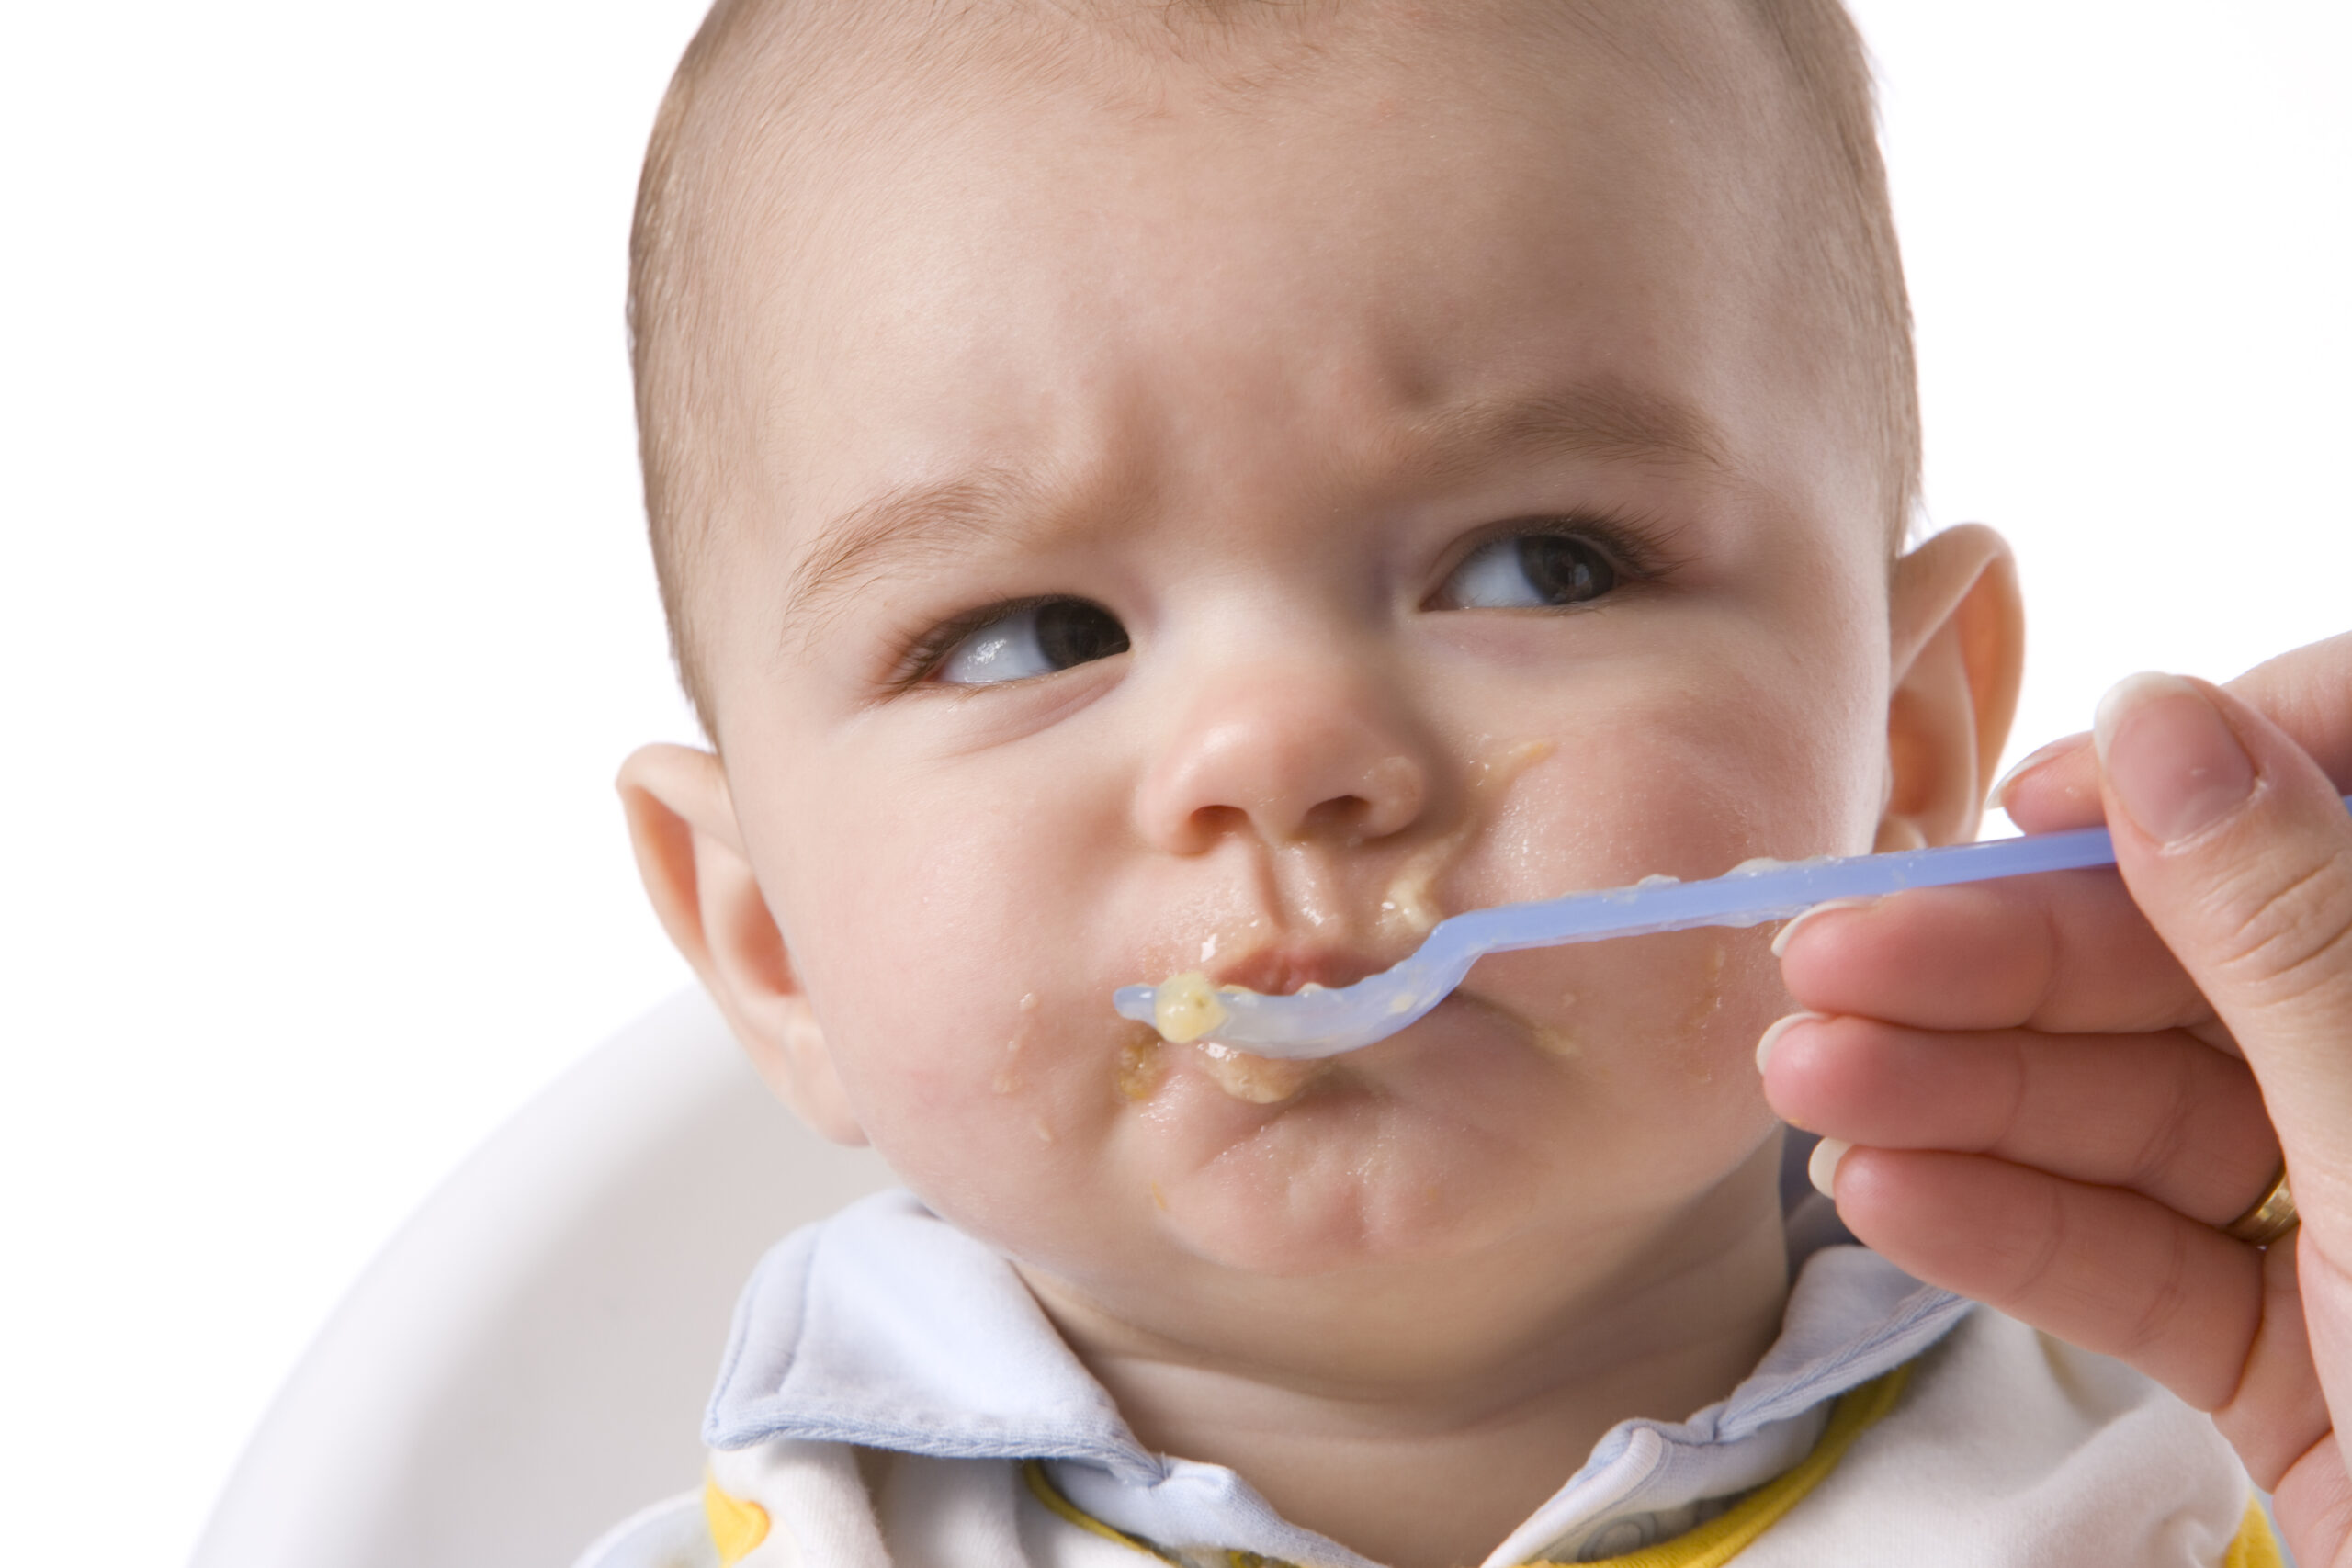 A sensible start on solid foods: Are the allergy and obesity risks real?